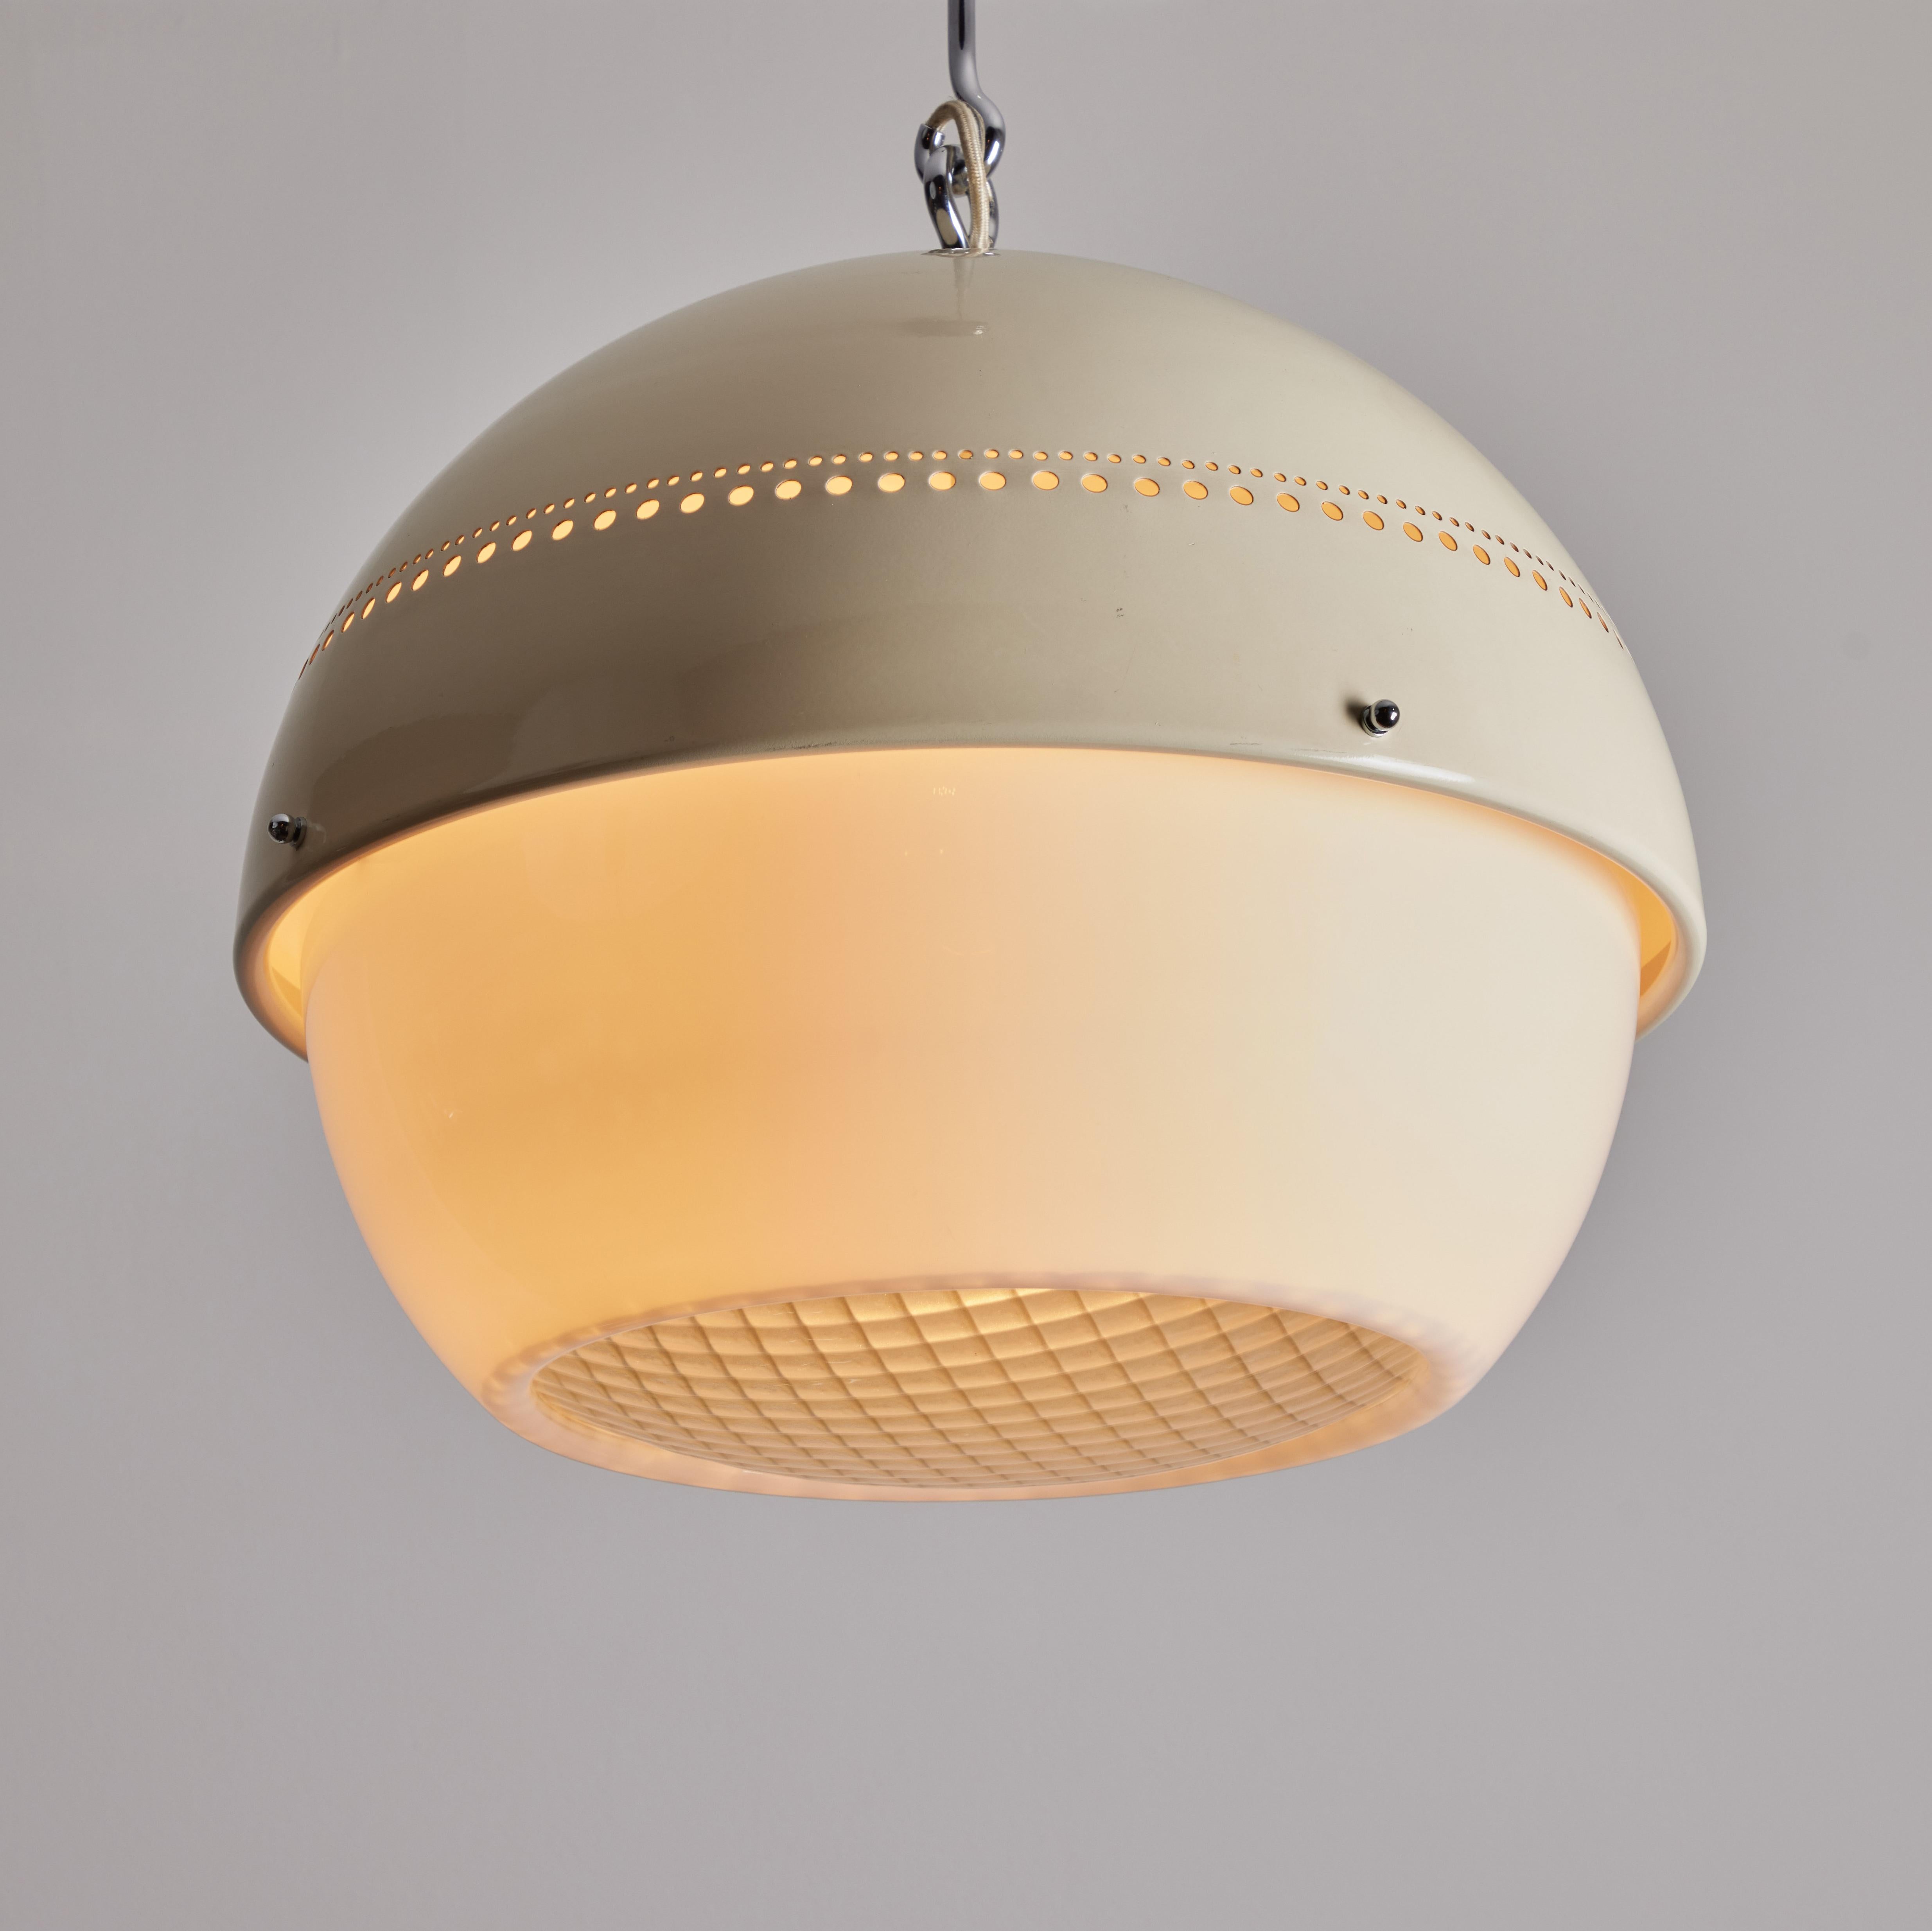 Model 2048 Ceiling Light by Sergio Asti and Gino Sarfatti for Arteluce. Designed and manufactured in Italy circa the 1950s. Enameled metal spun perforated shade paired with a milky acrylic diffuser band. The bottom diffuser is textured plexiglass.